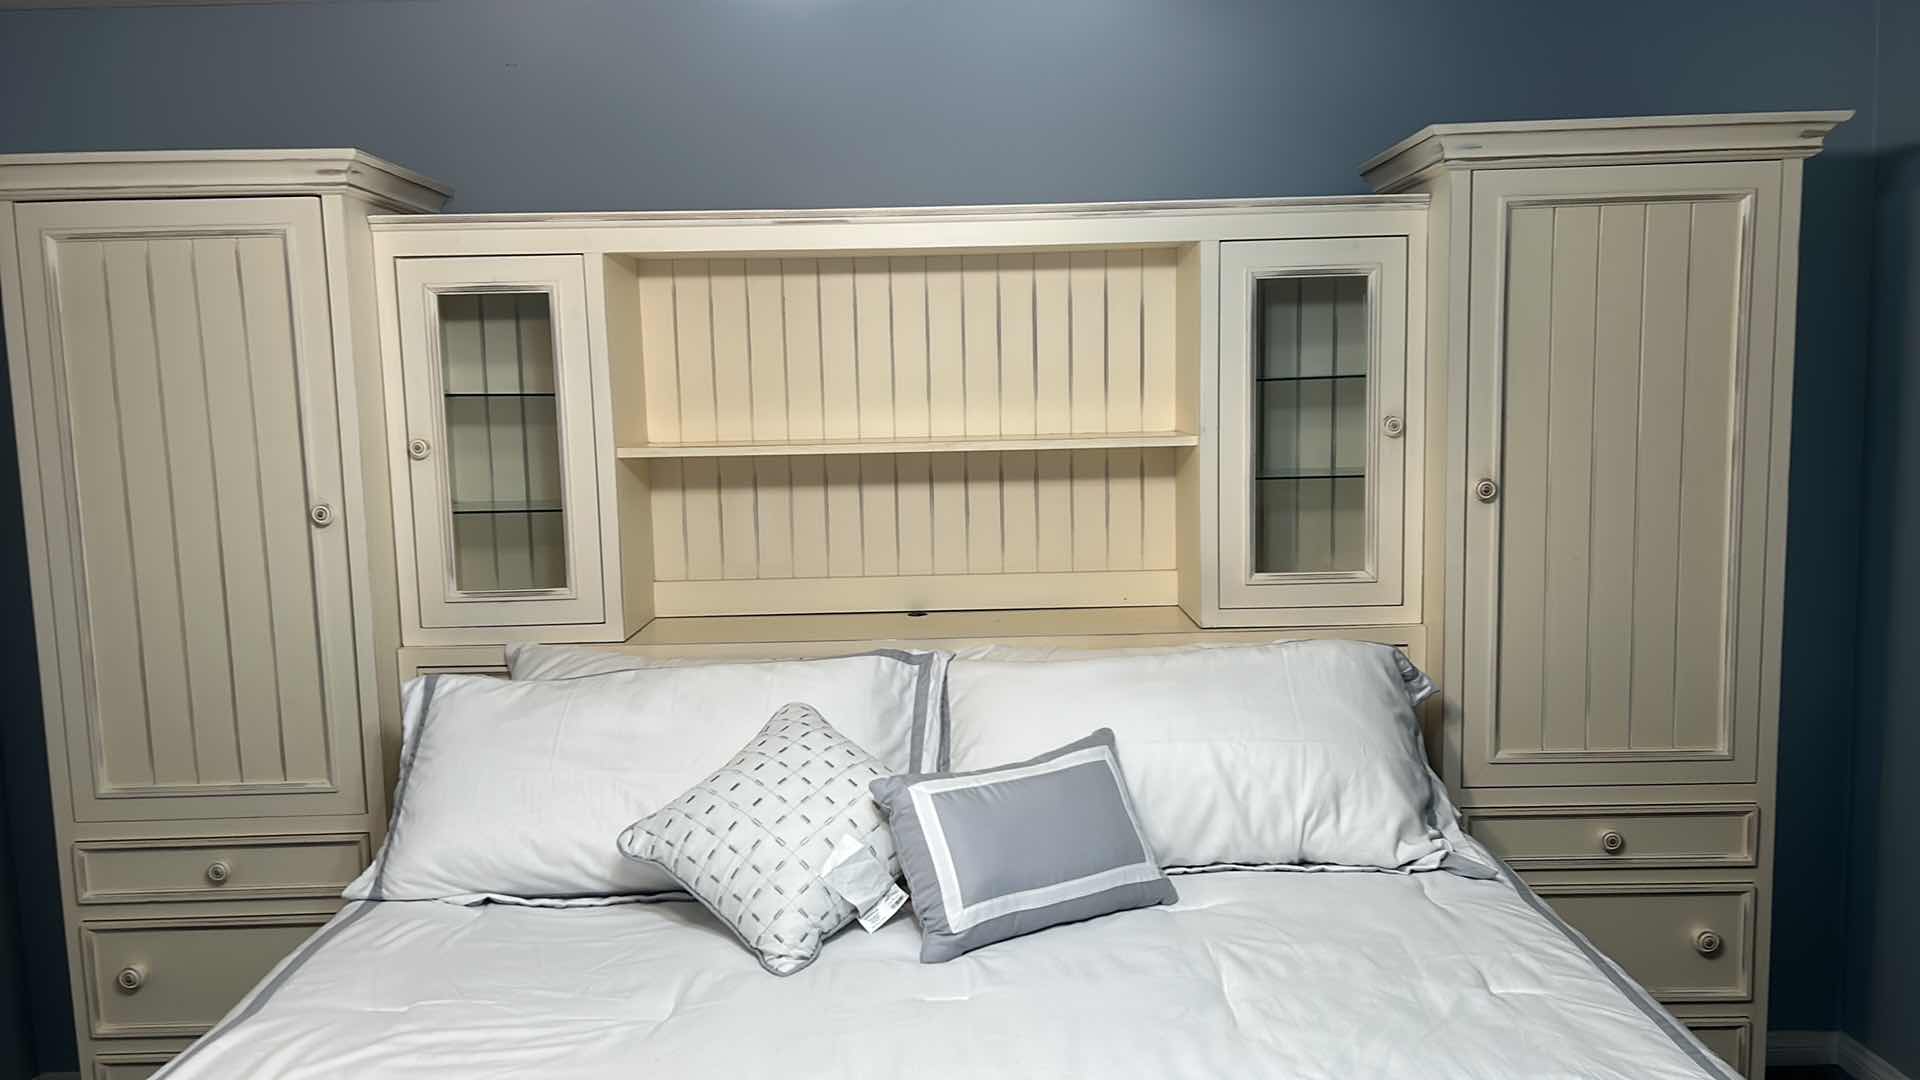 Photo 3 of ASHLEY FURNITURE CREAM FARMHOUSE STYLE BEDROOM SET (EXCLUDES MATTRESS AND BEDDING) $6000 10’6.5” x 19” x H6’8”